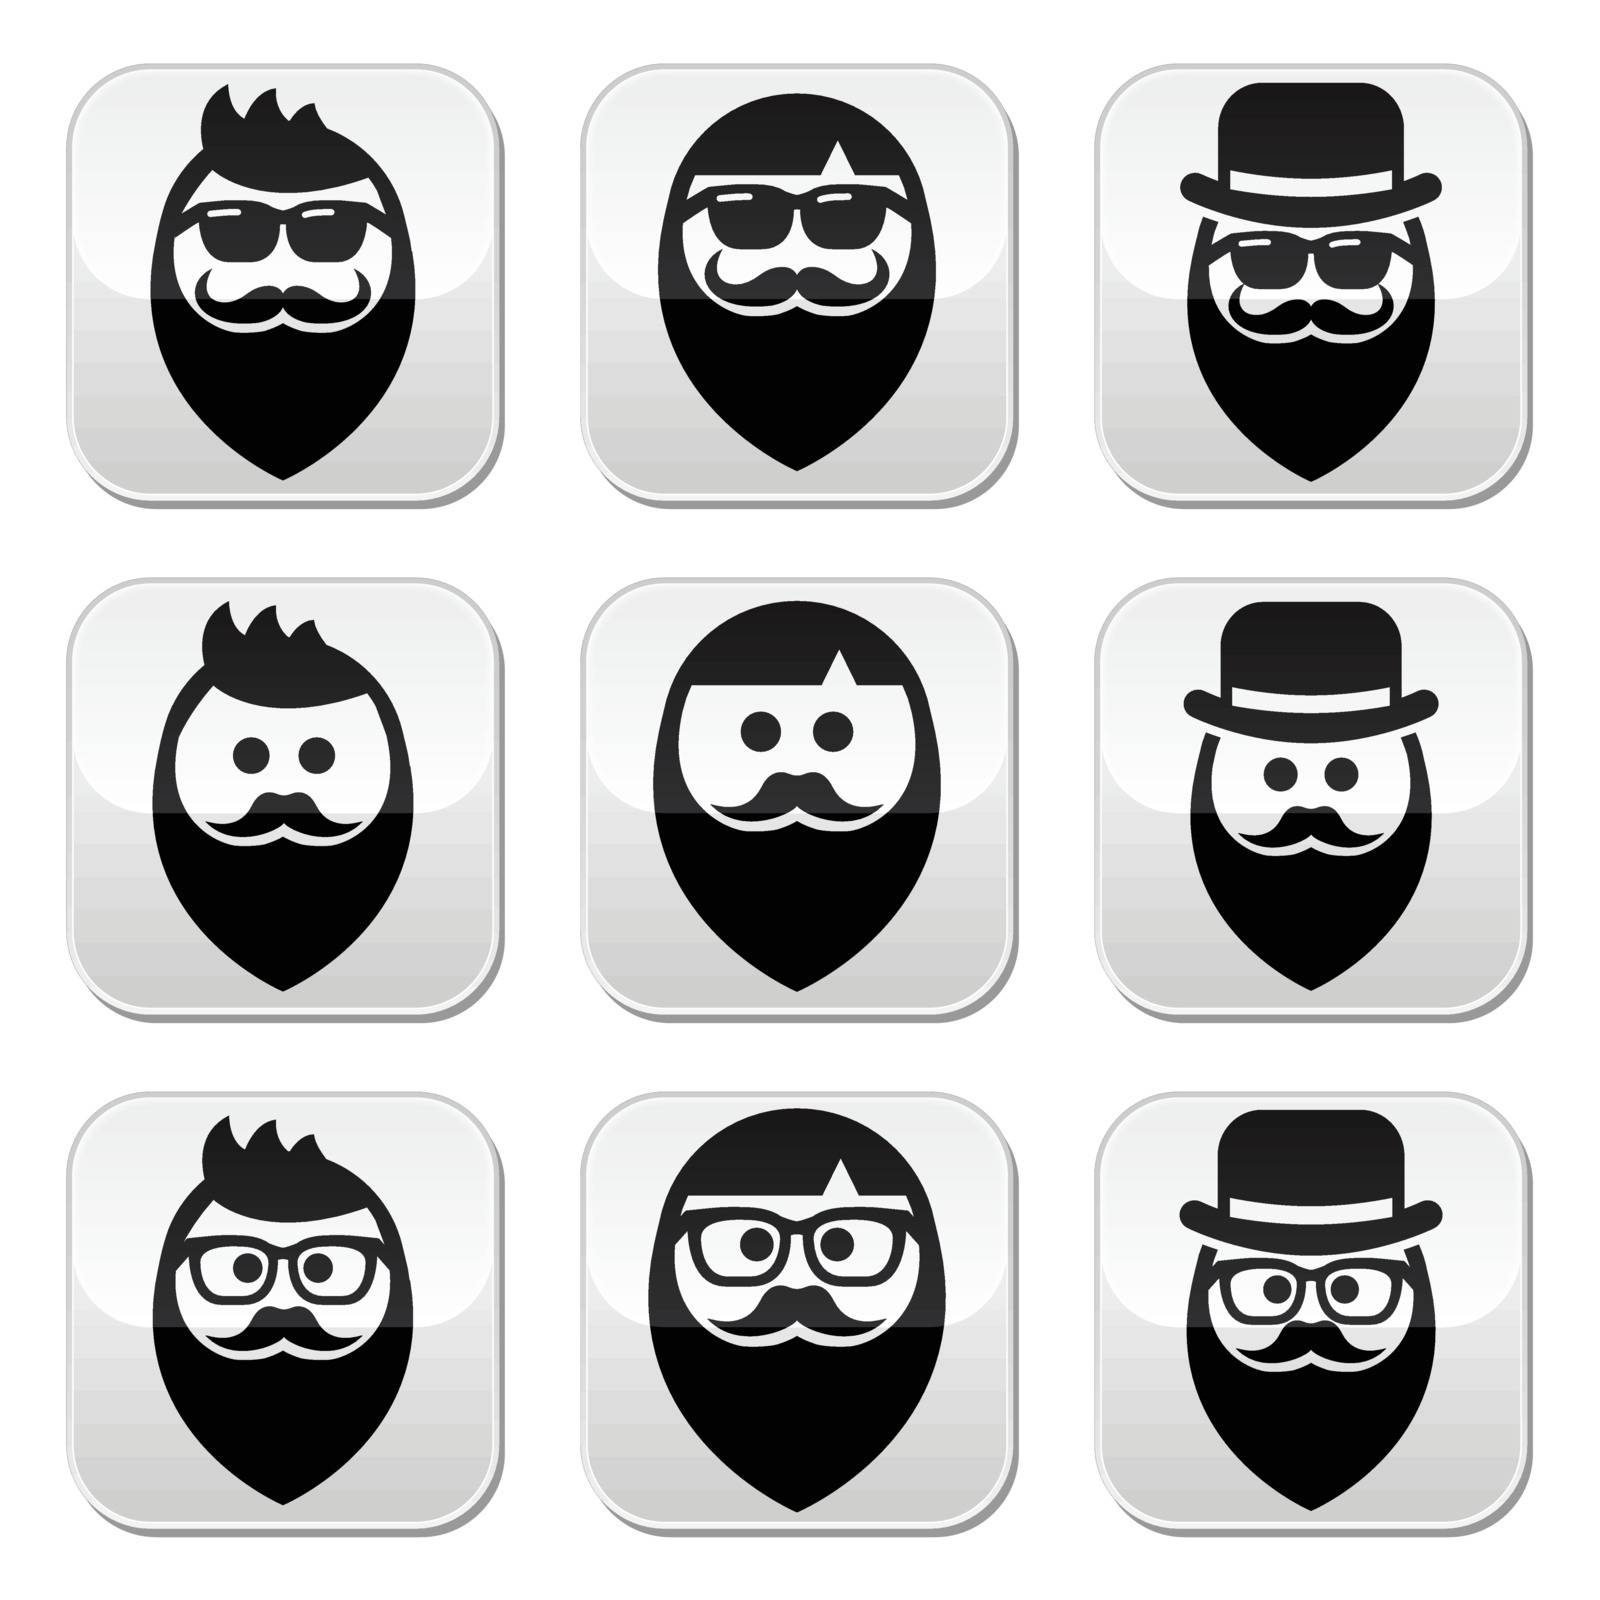 Man with beard with moustache or mustache, hipster buttons set by RedKoala